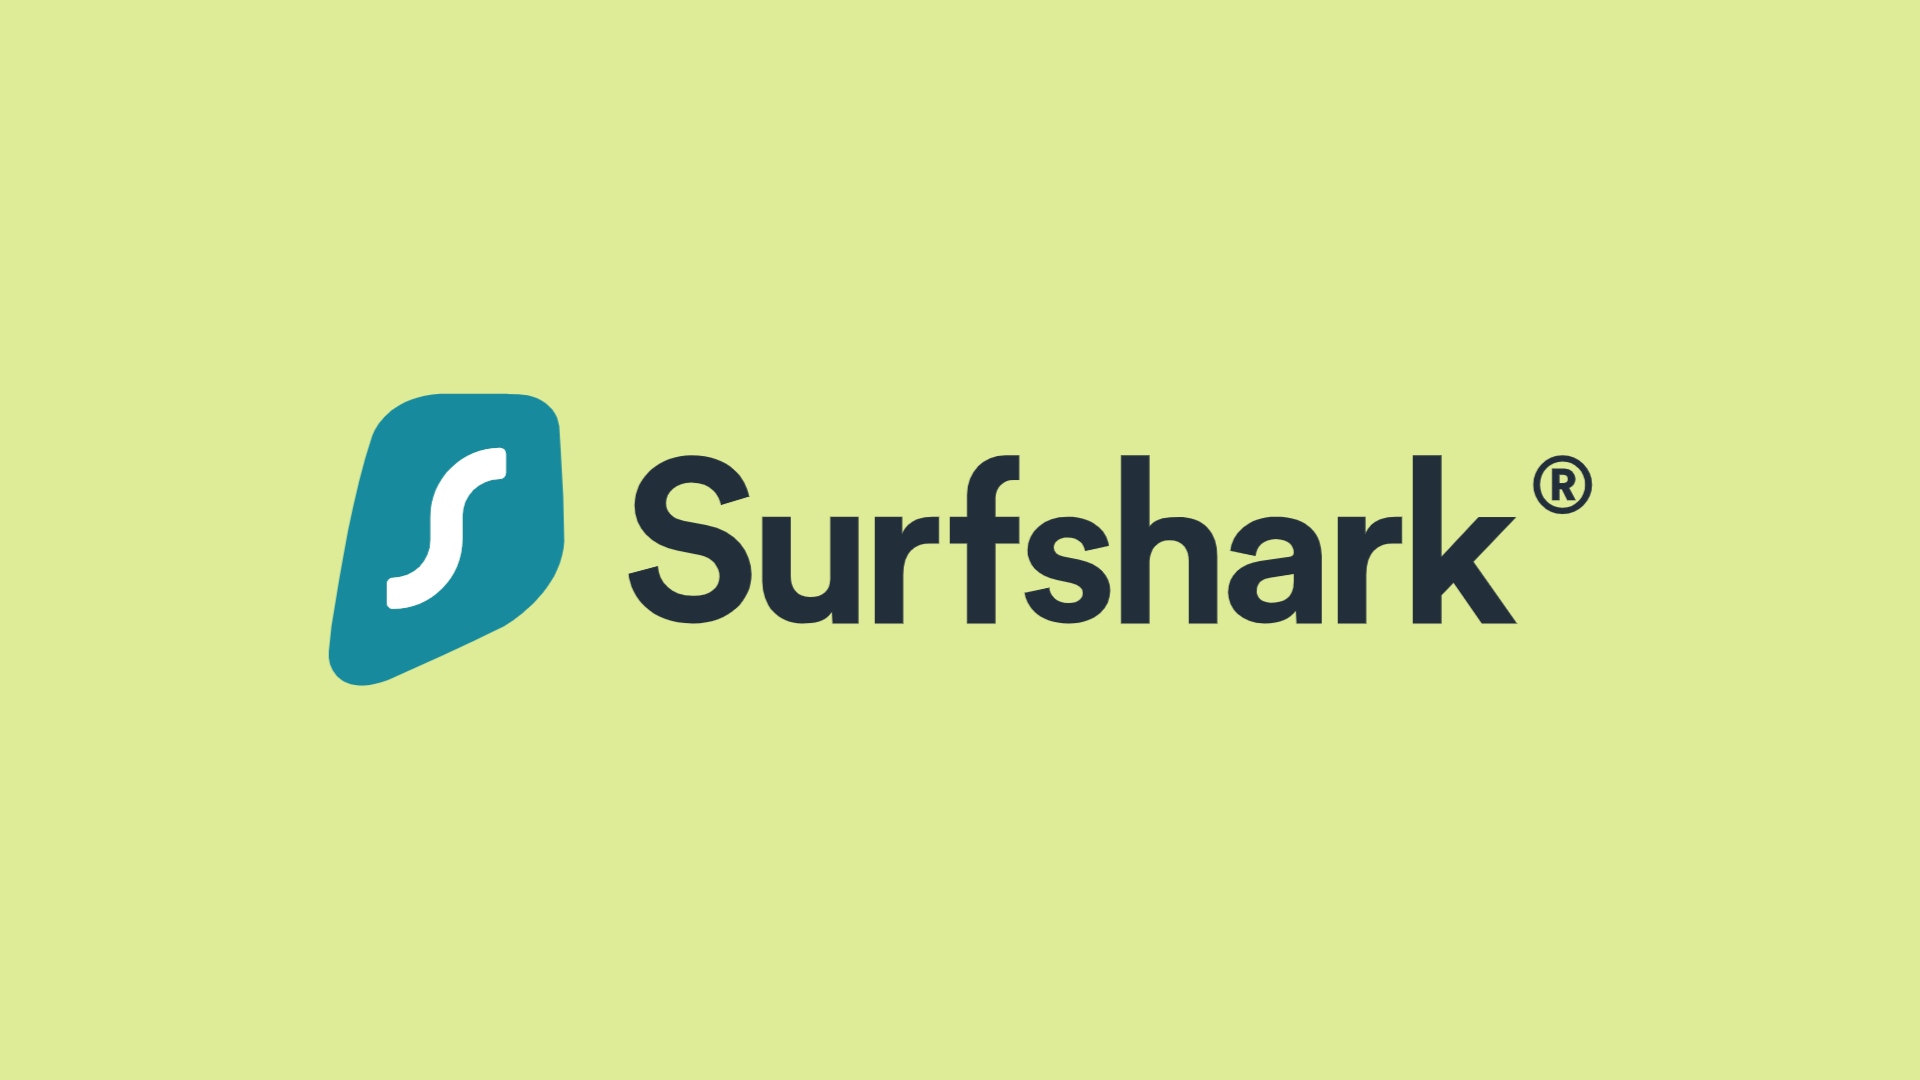 Best VPN for Xbox - Surfshark. Image shows the company's logo.